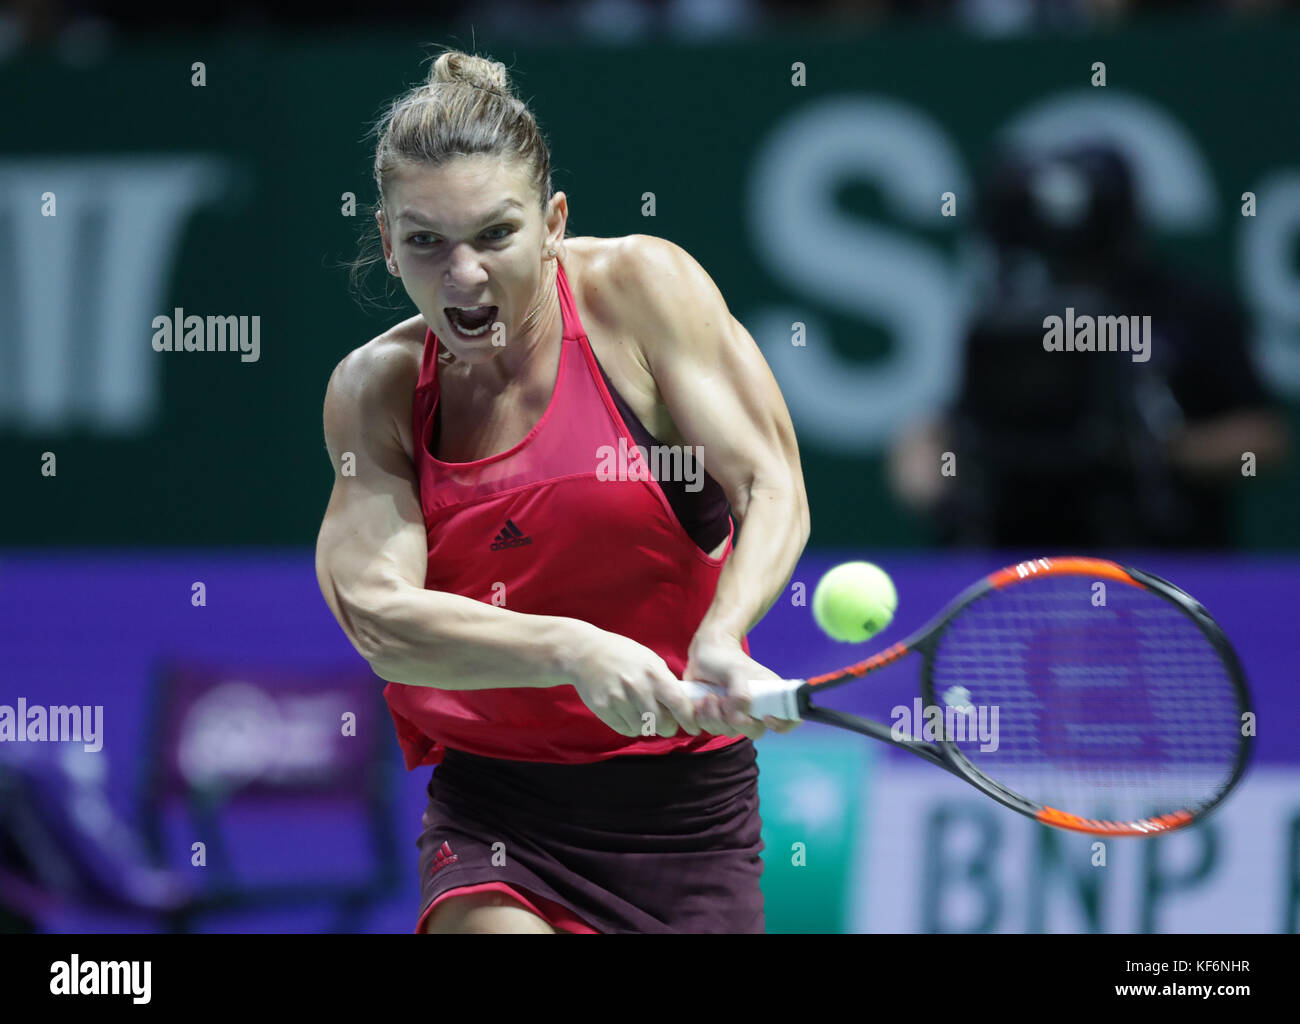 Singapore, Singapore. 25th Oct, 2017. Romanian tennis player Simona Halep  is in action during her first round robin match of the WTA Finals vs Danish  tennis player Caroline Wozniacki on Oct 25,